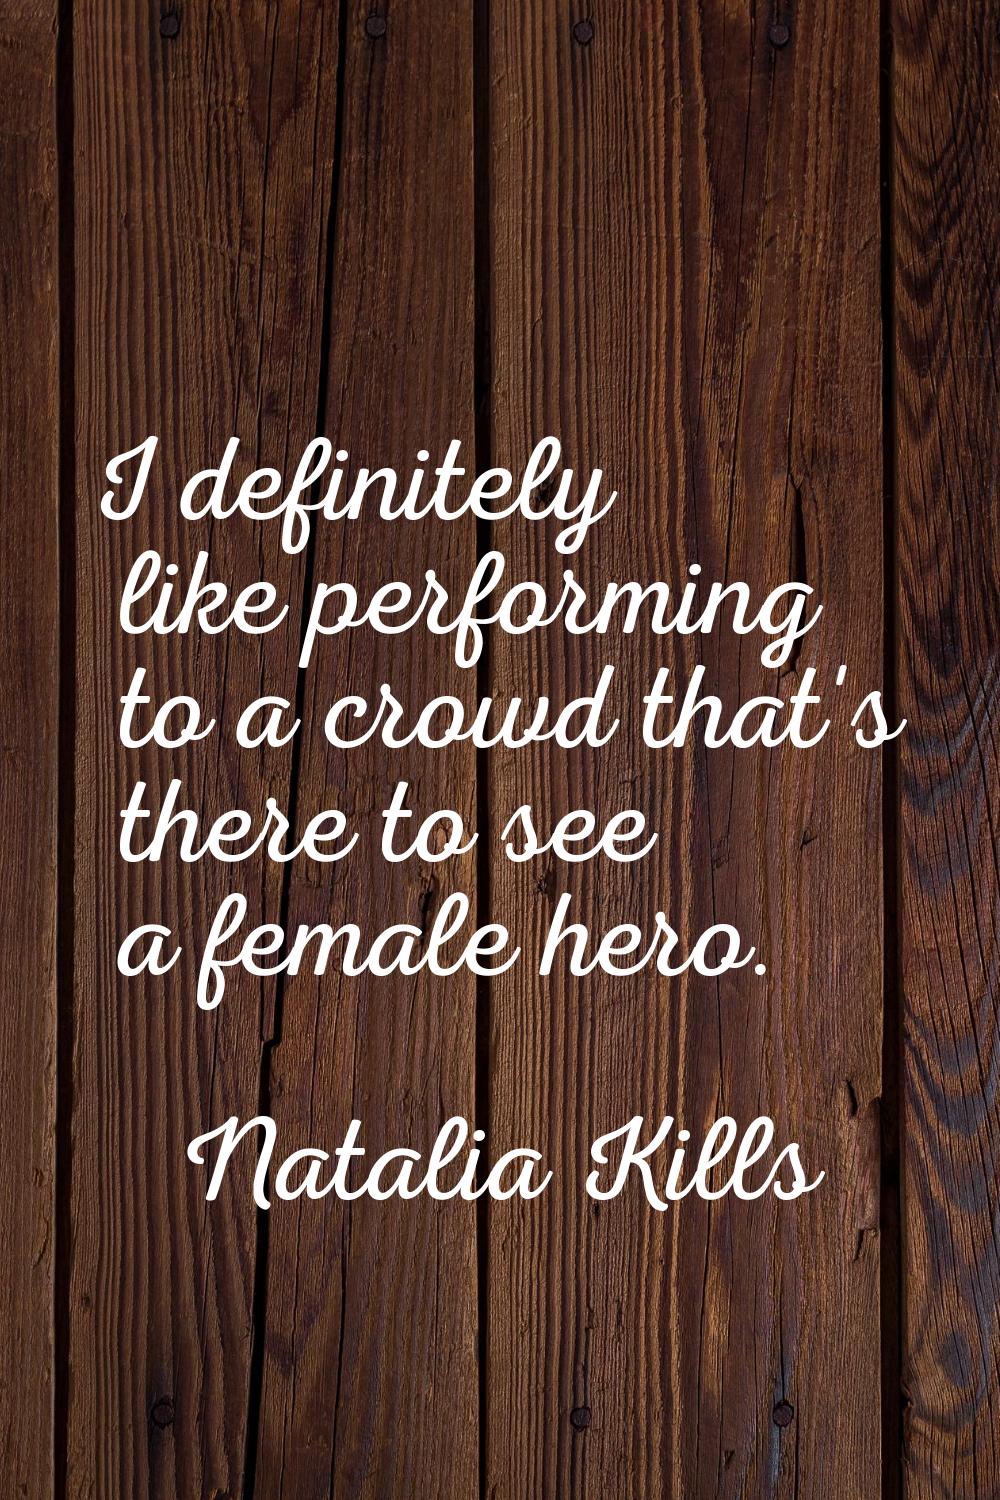 I definitely like performing to a crowd that's there to see a female hero.